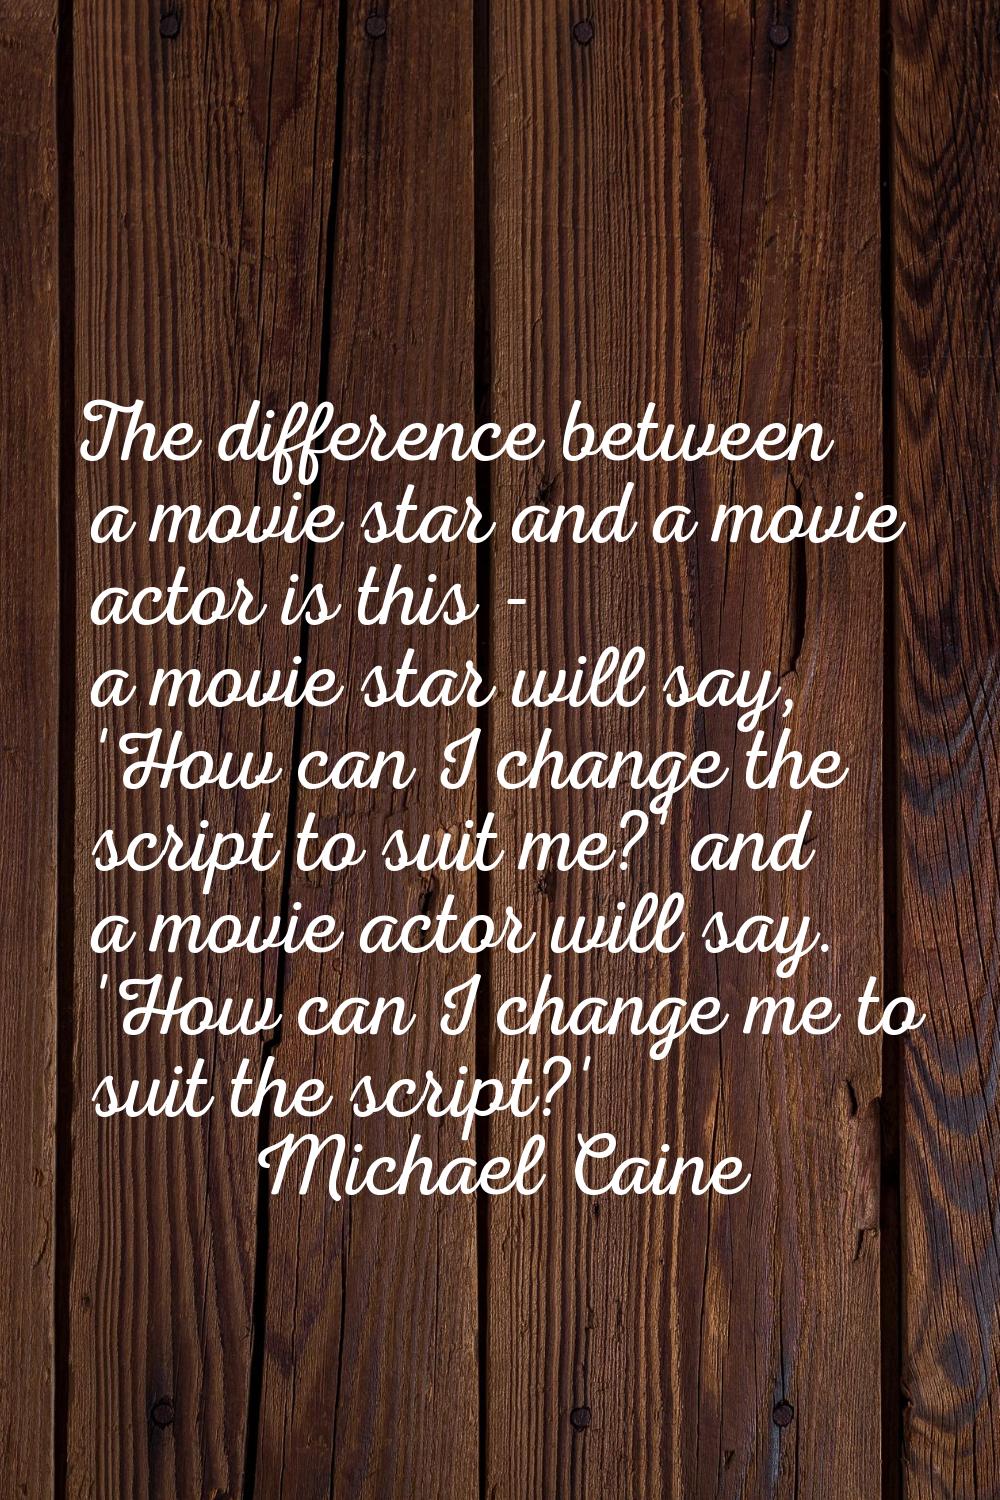 The difference between a movie star and a movie actor is this - a movie star will say, 'How can I c